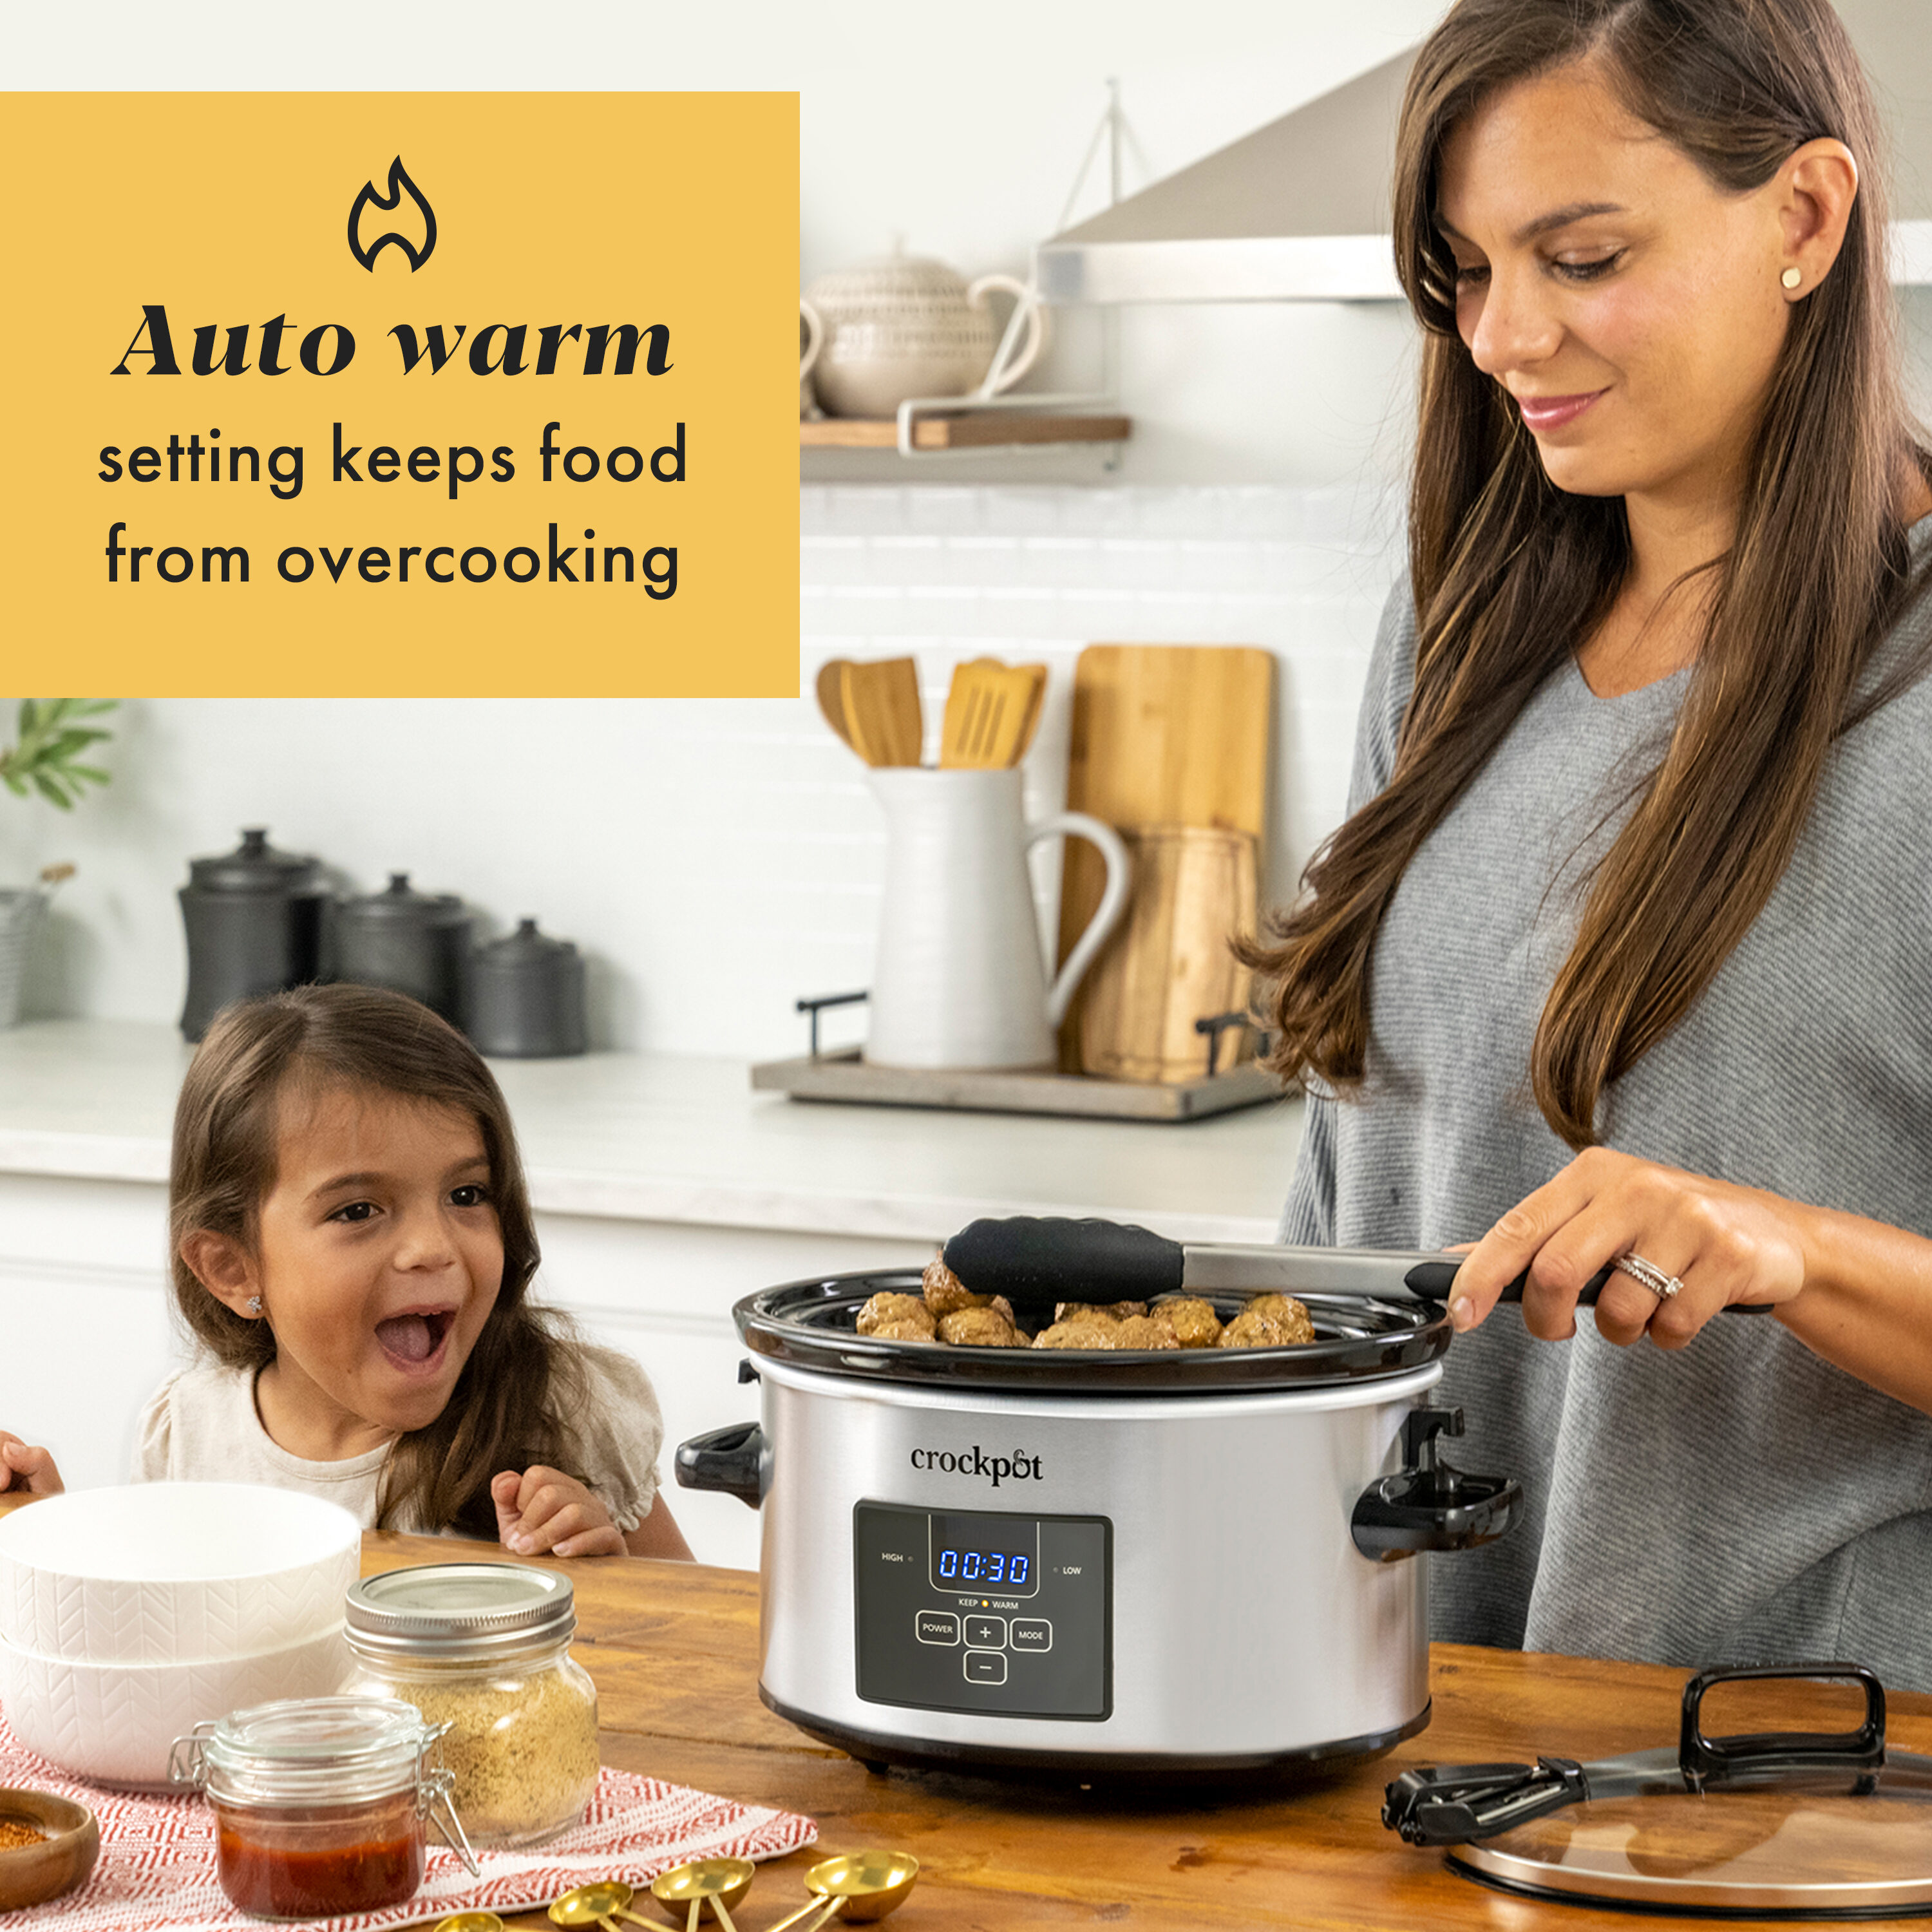 Crock-Pot Large 8 Quart Programmable Slow Cooker with Auto Warm Setting and  Cookbook, Black Stainless Steel & Large 8 Quart Oval Manual Slow Cooker